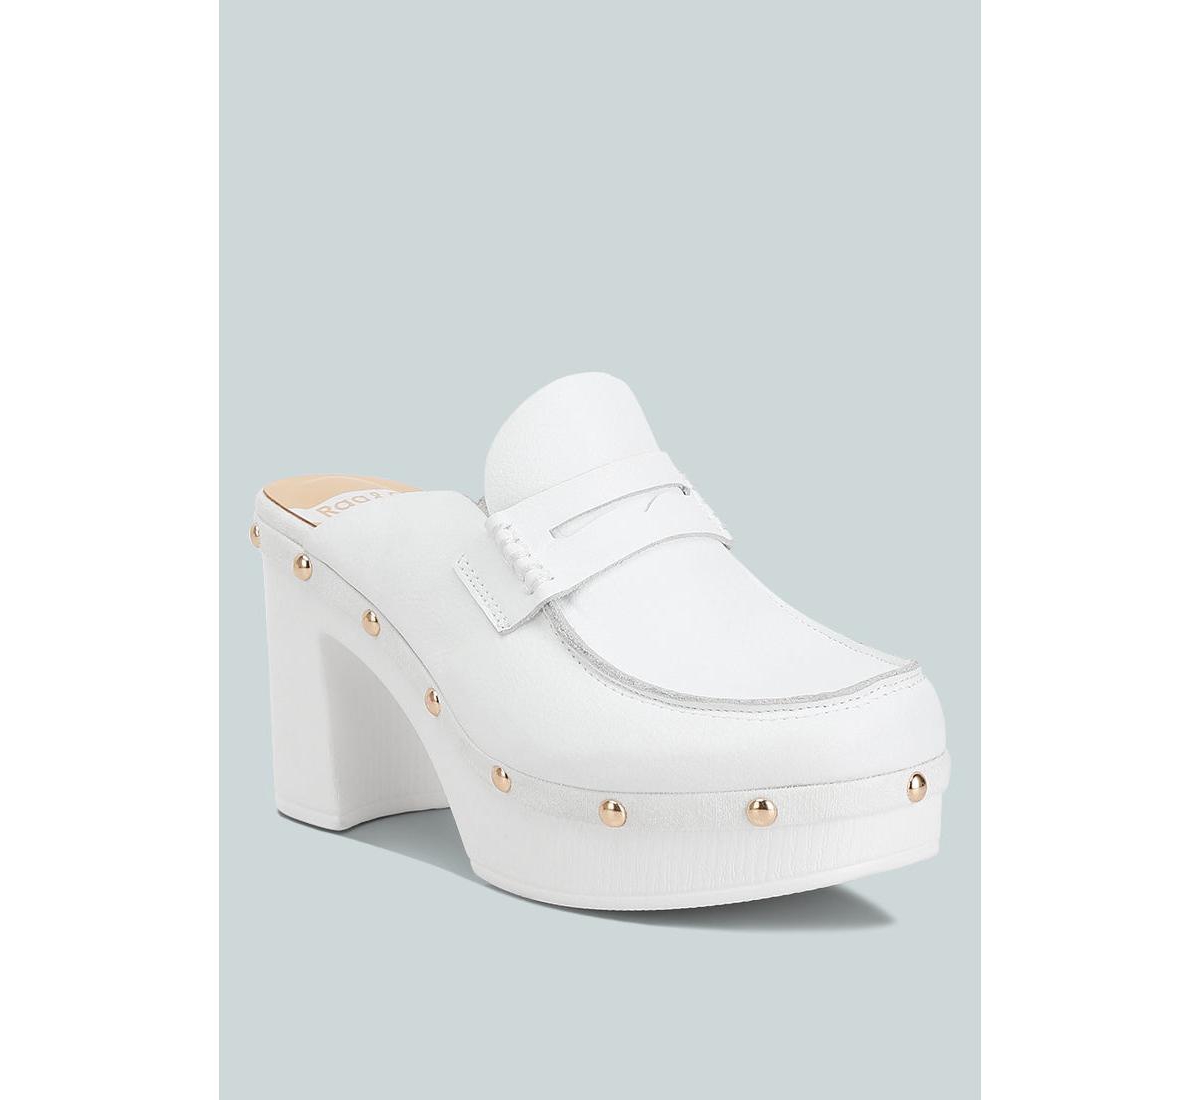 Lyrac Recycled Leather Platform Clogs In White - White